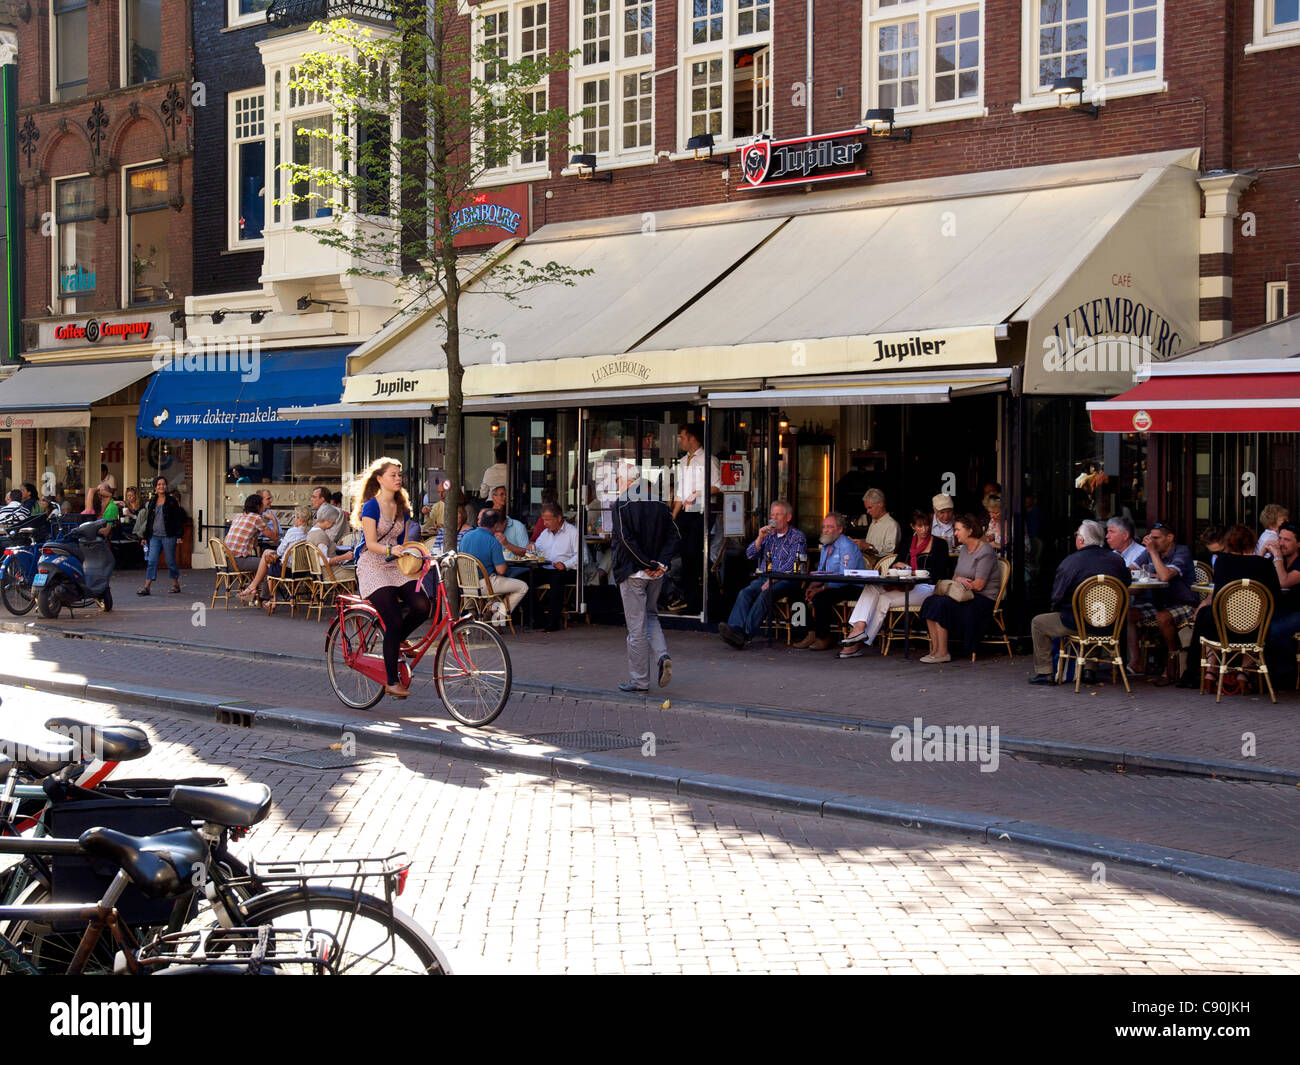 Cafe Luxembourg on the Spui square is one of the most popular grand cafes in Amsterdam, the Netherlands Stock Photo